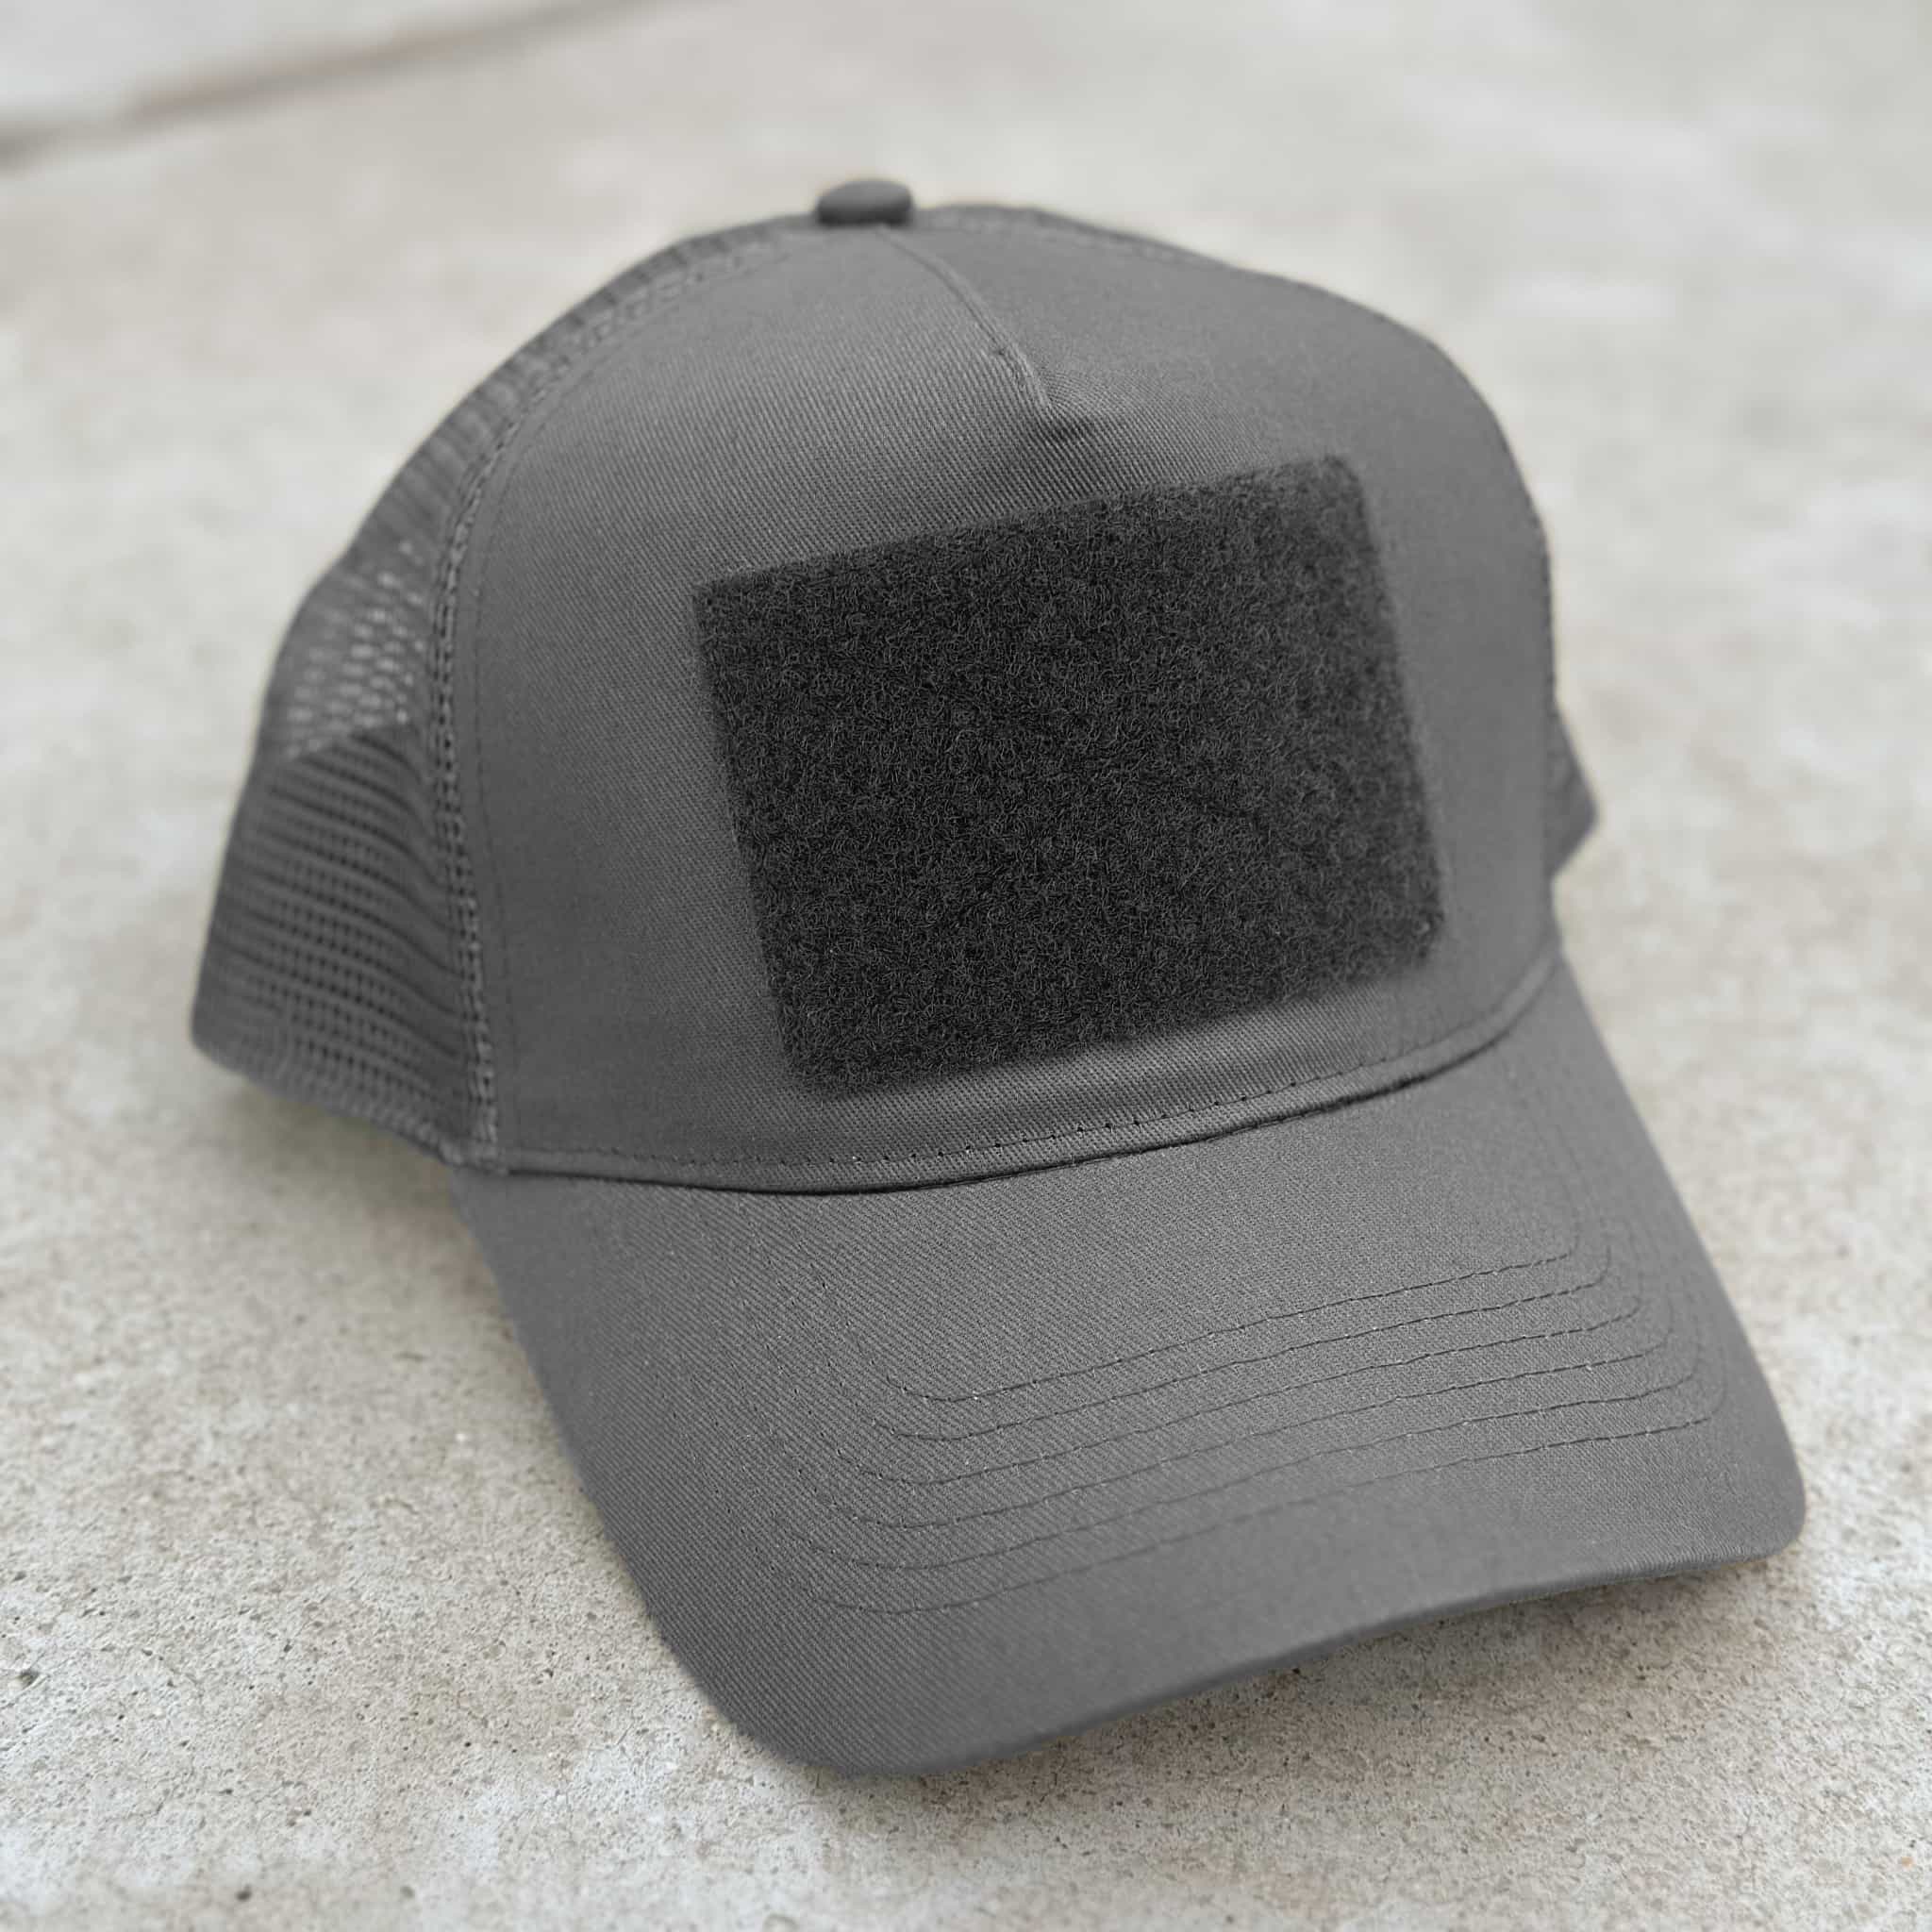 The Blank Canvas Snapback Cap in grey color with large hook-and-loop area on the front